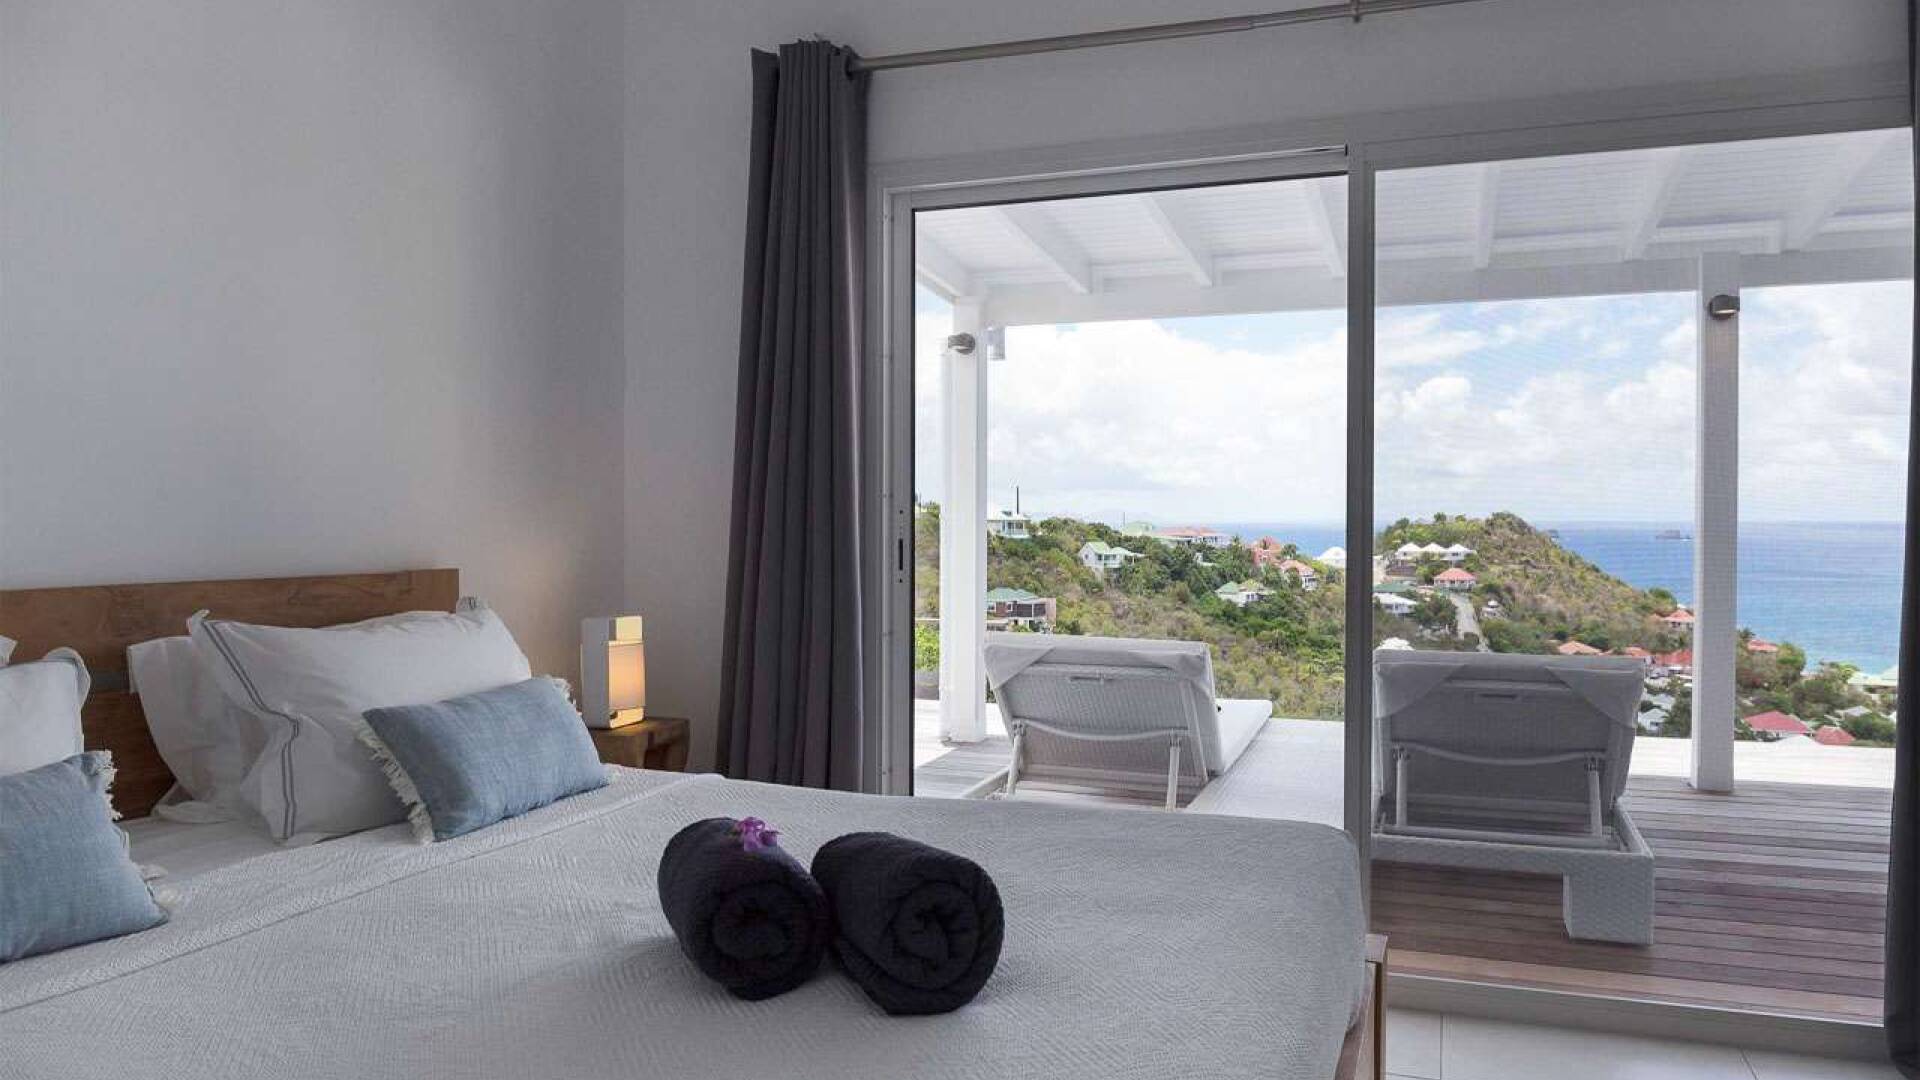 Bedroom at WV RIV, Flamands, St. Barthelemy